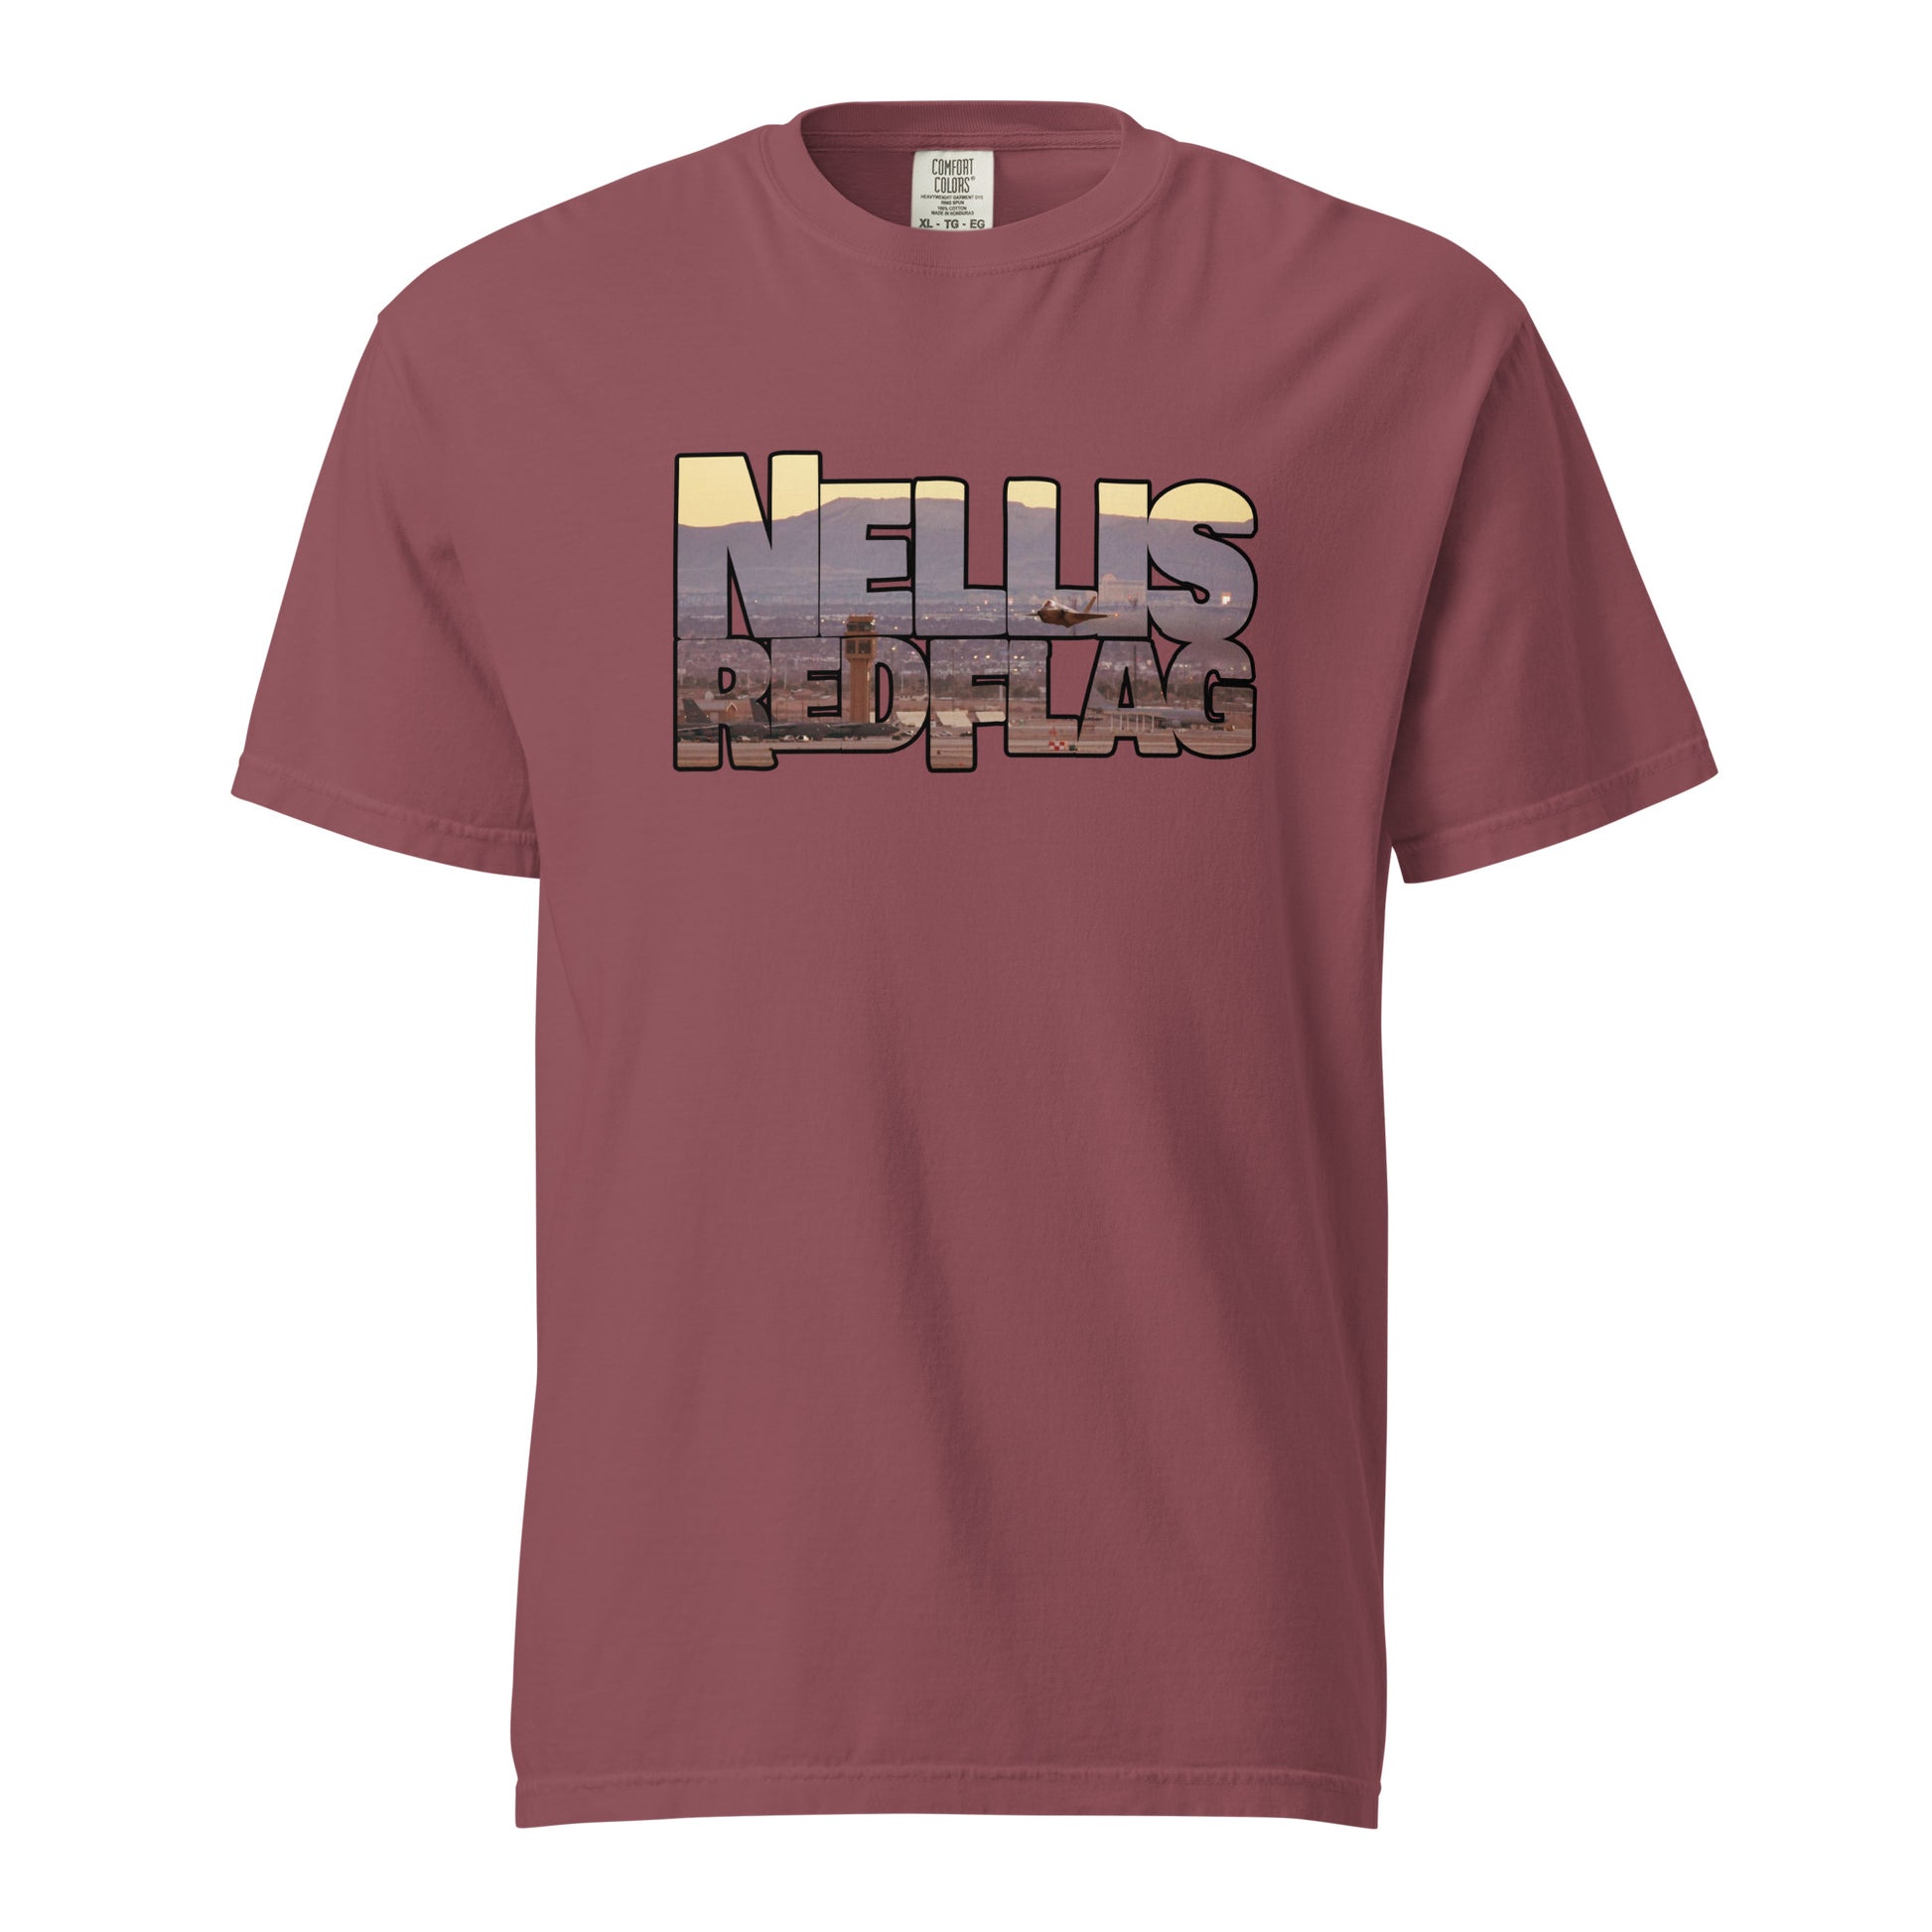 This shirt features an image of an F-35 taking off from Nellis Air Force Base contained inside of the words "Nellis Red Flag"